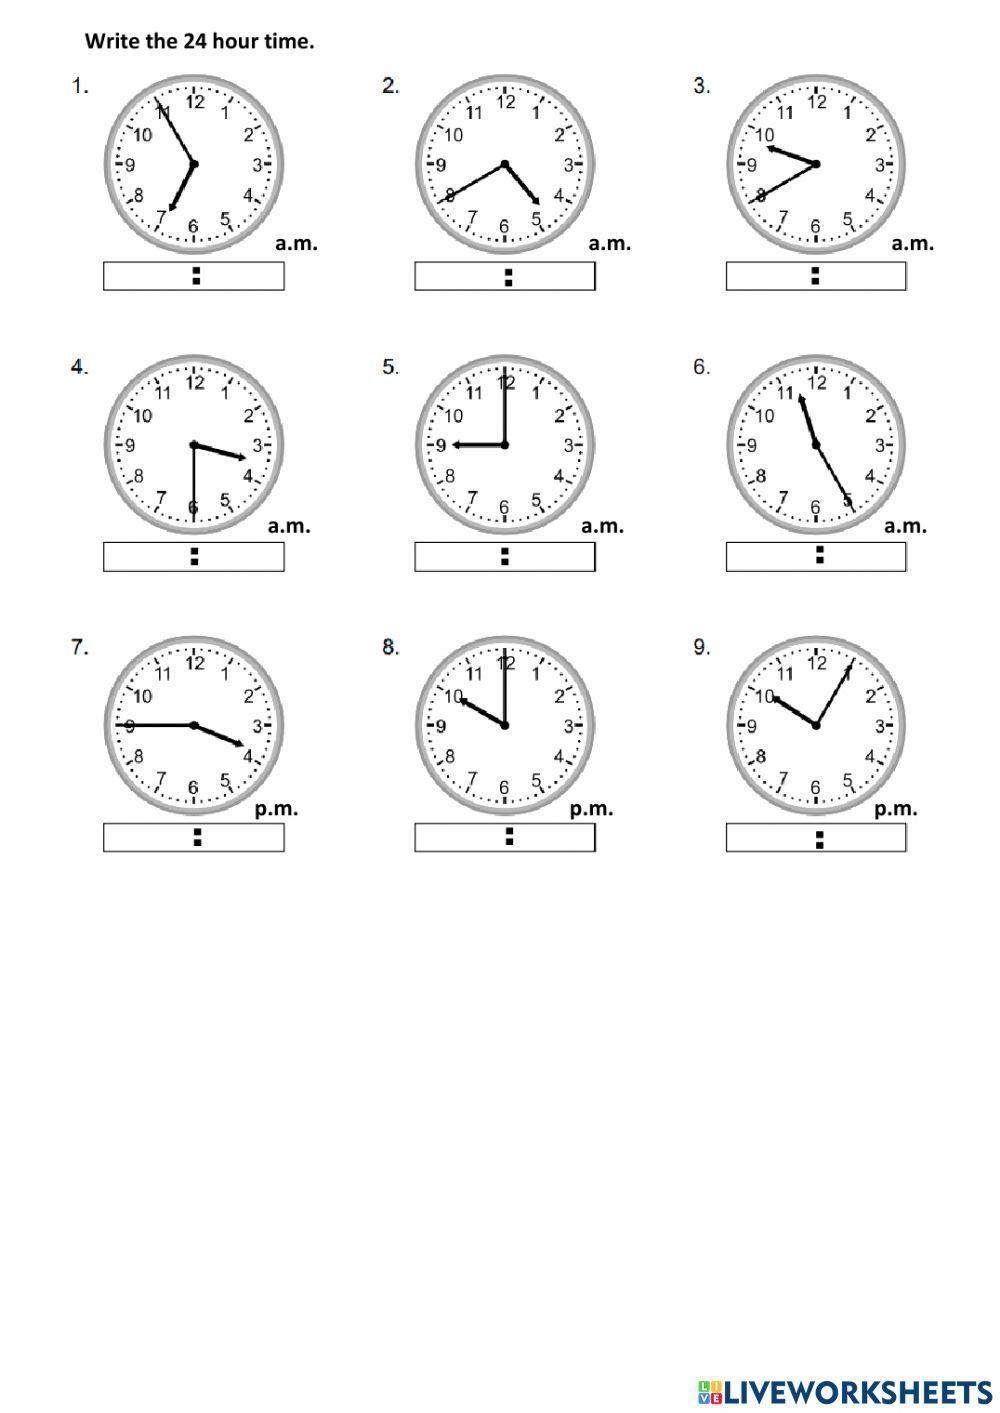 Reading Clocks 12 and 24 hour time Set 1